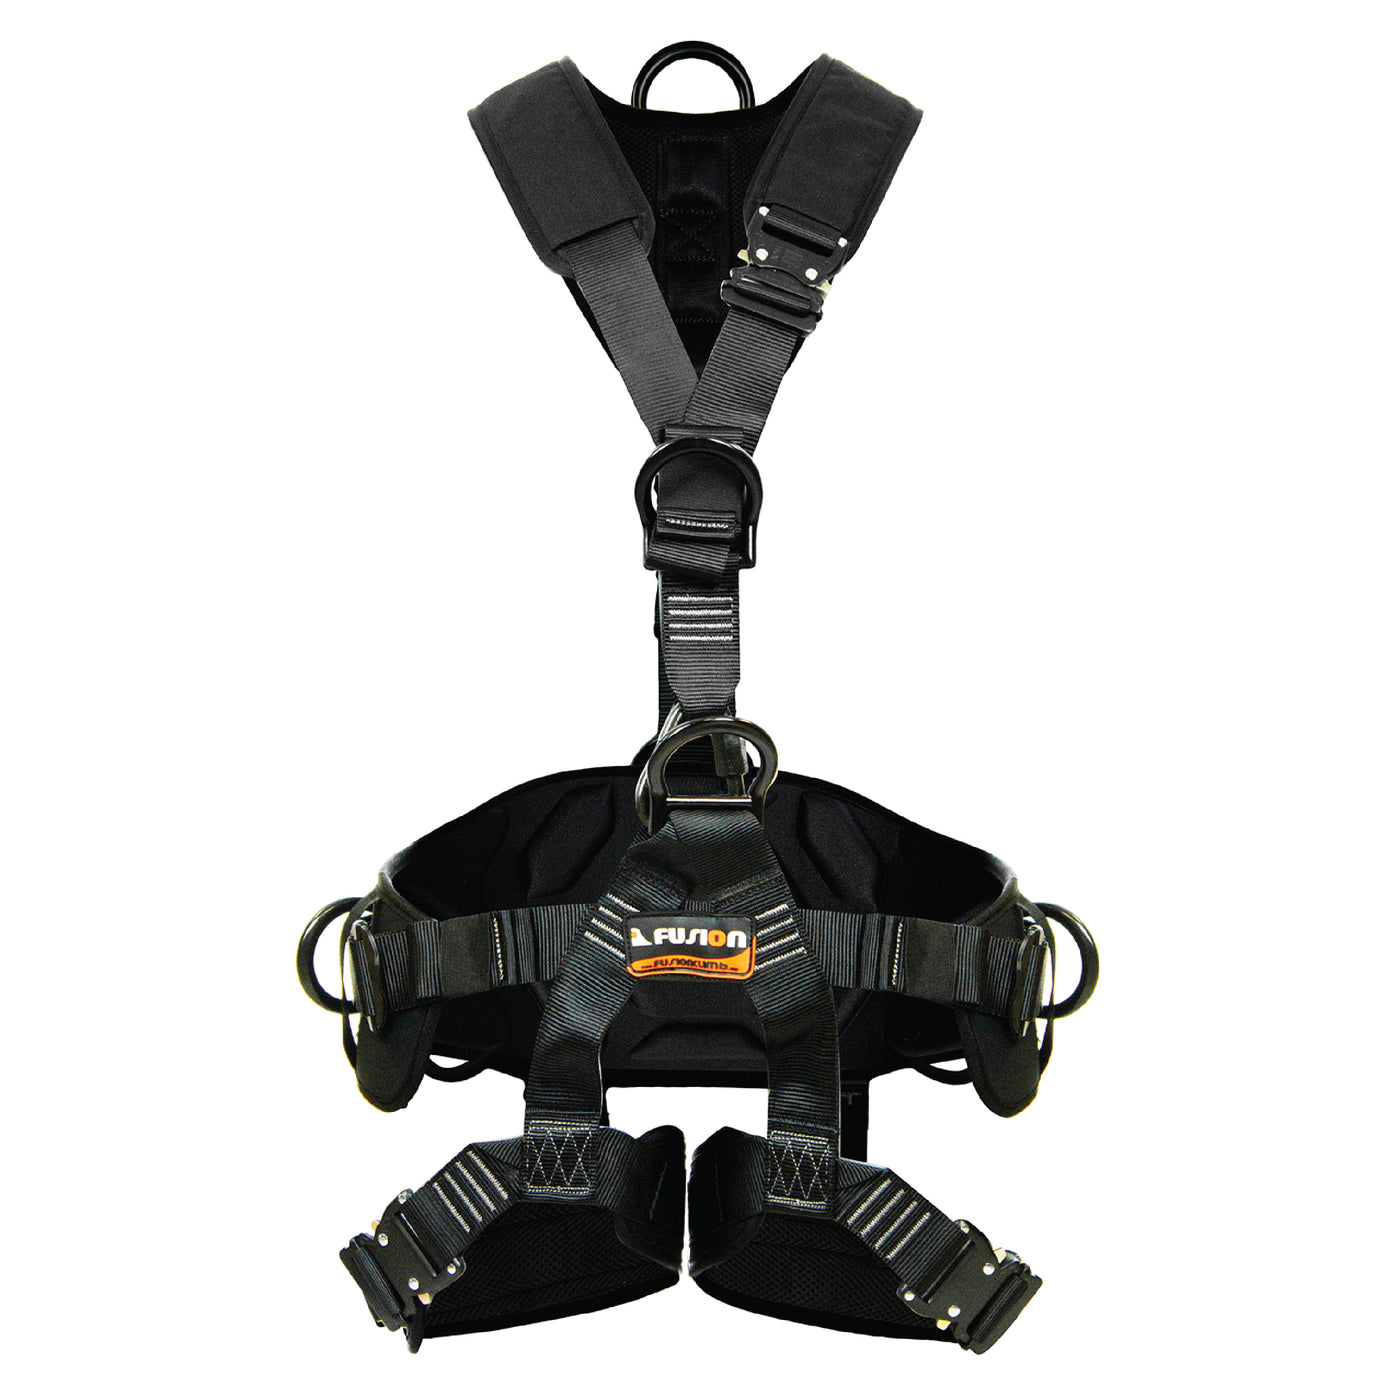 Tactical Rescue Harness with Flat Foam Padding